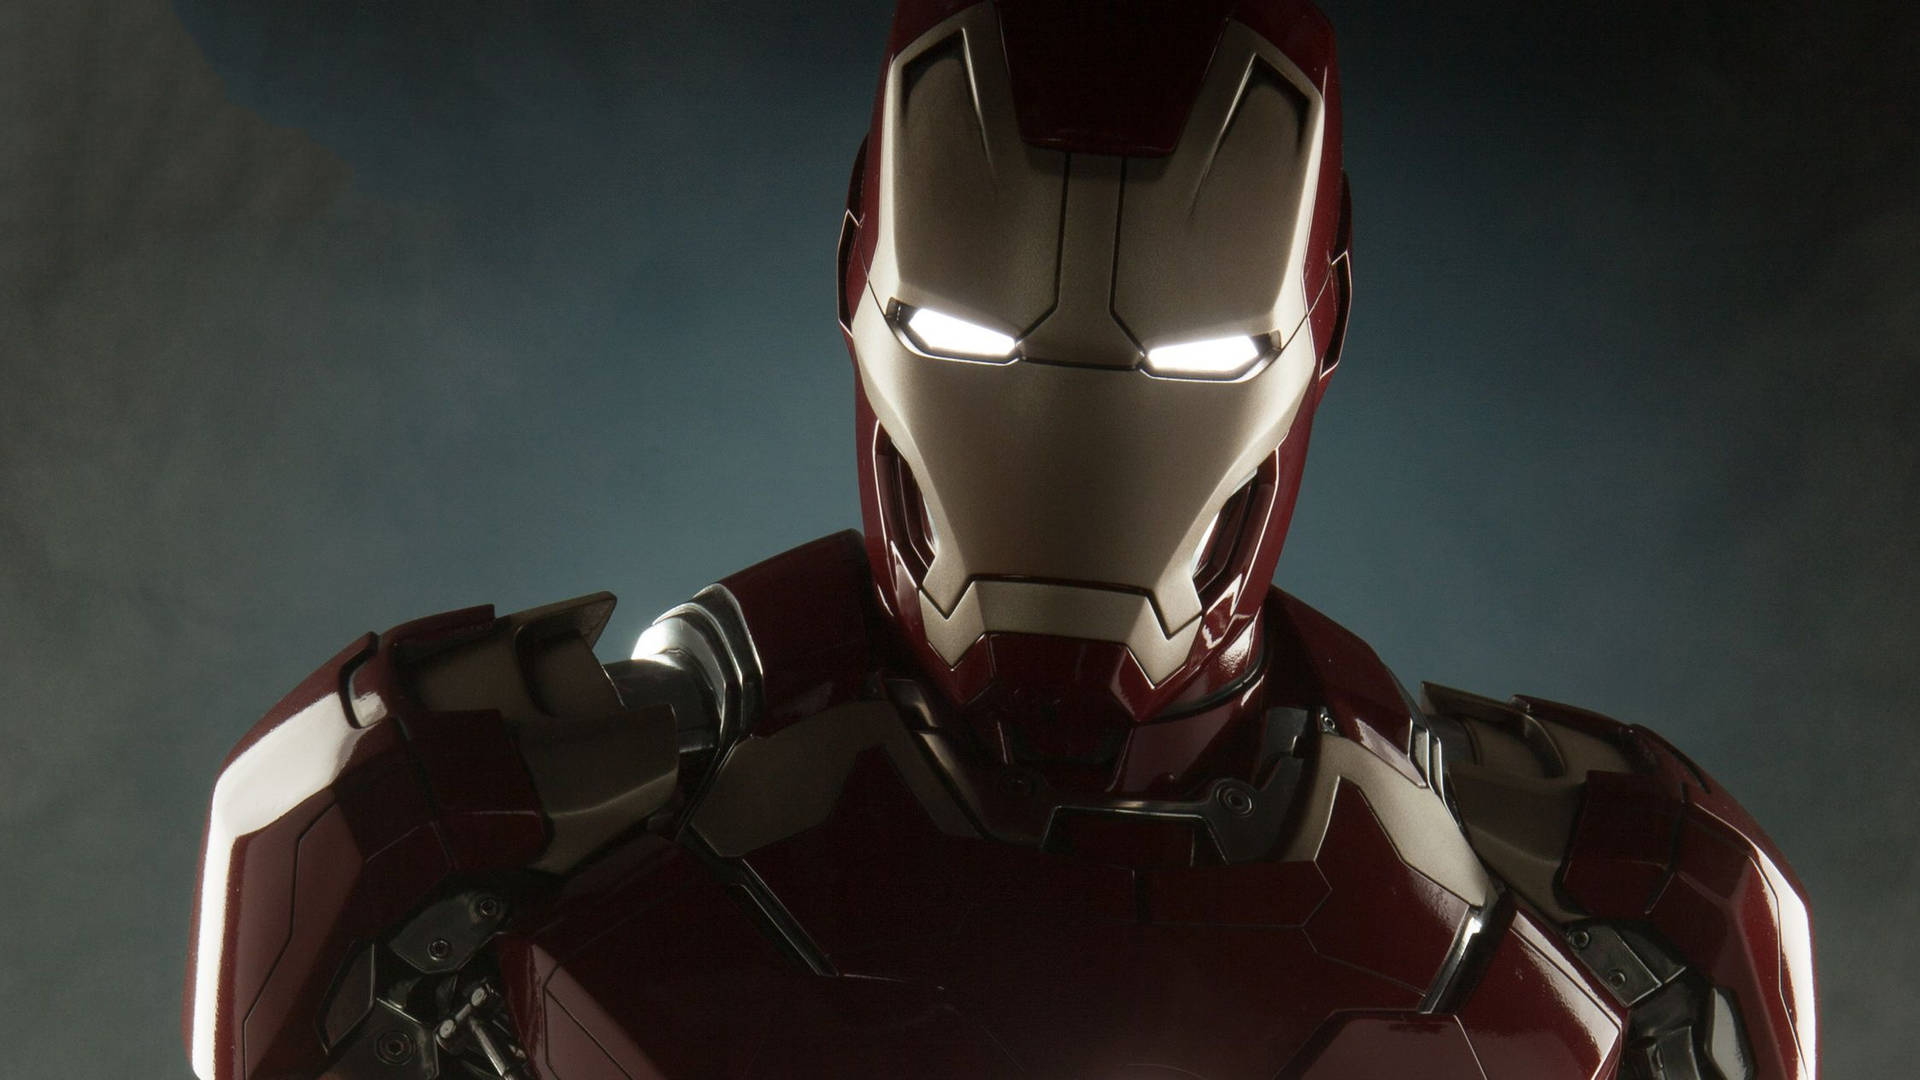 Iron Man Mark 3 - Ready For Action Wallpaper